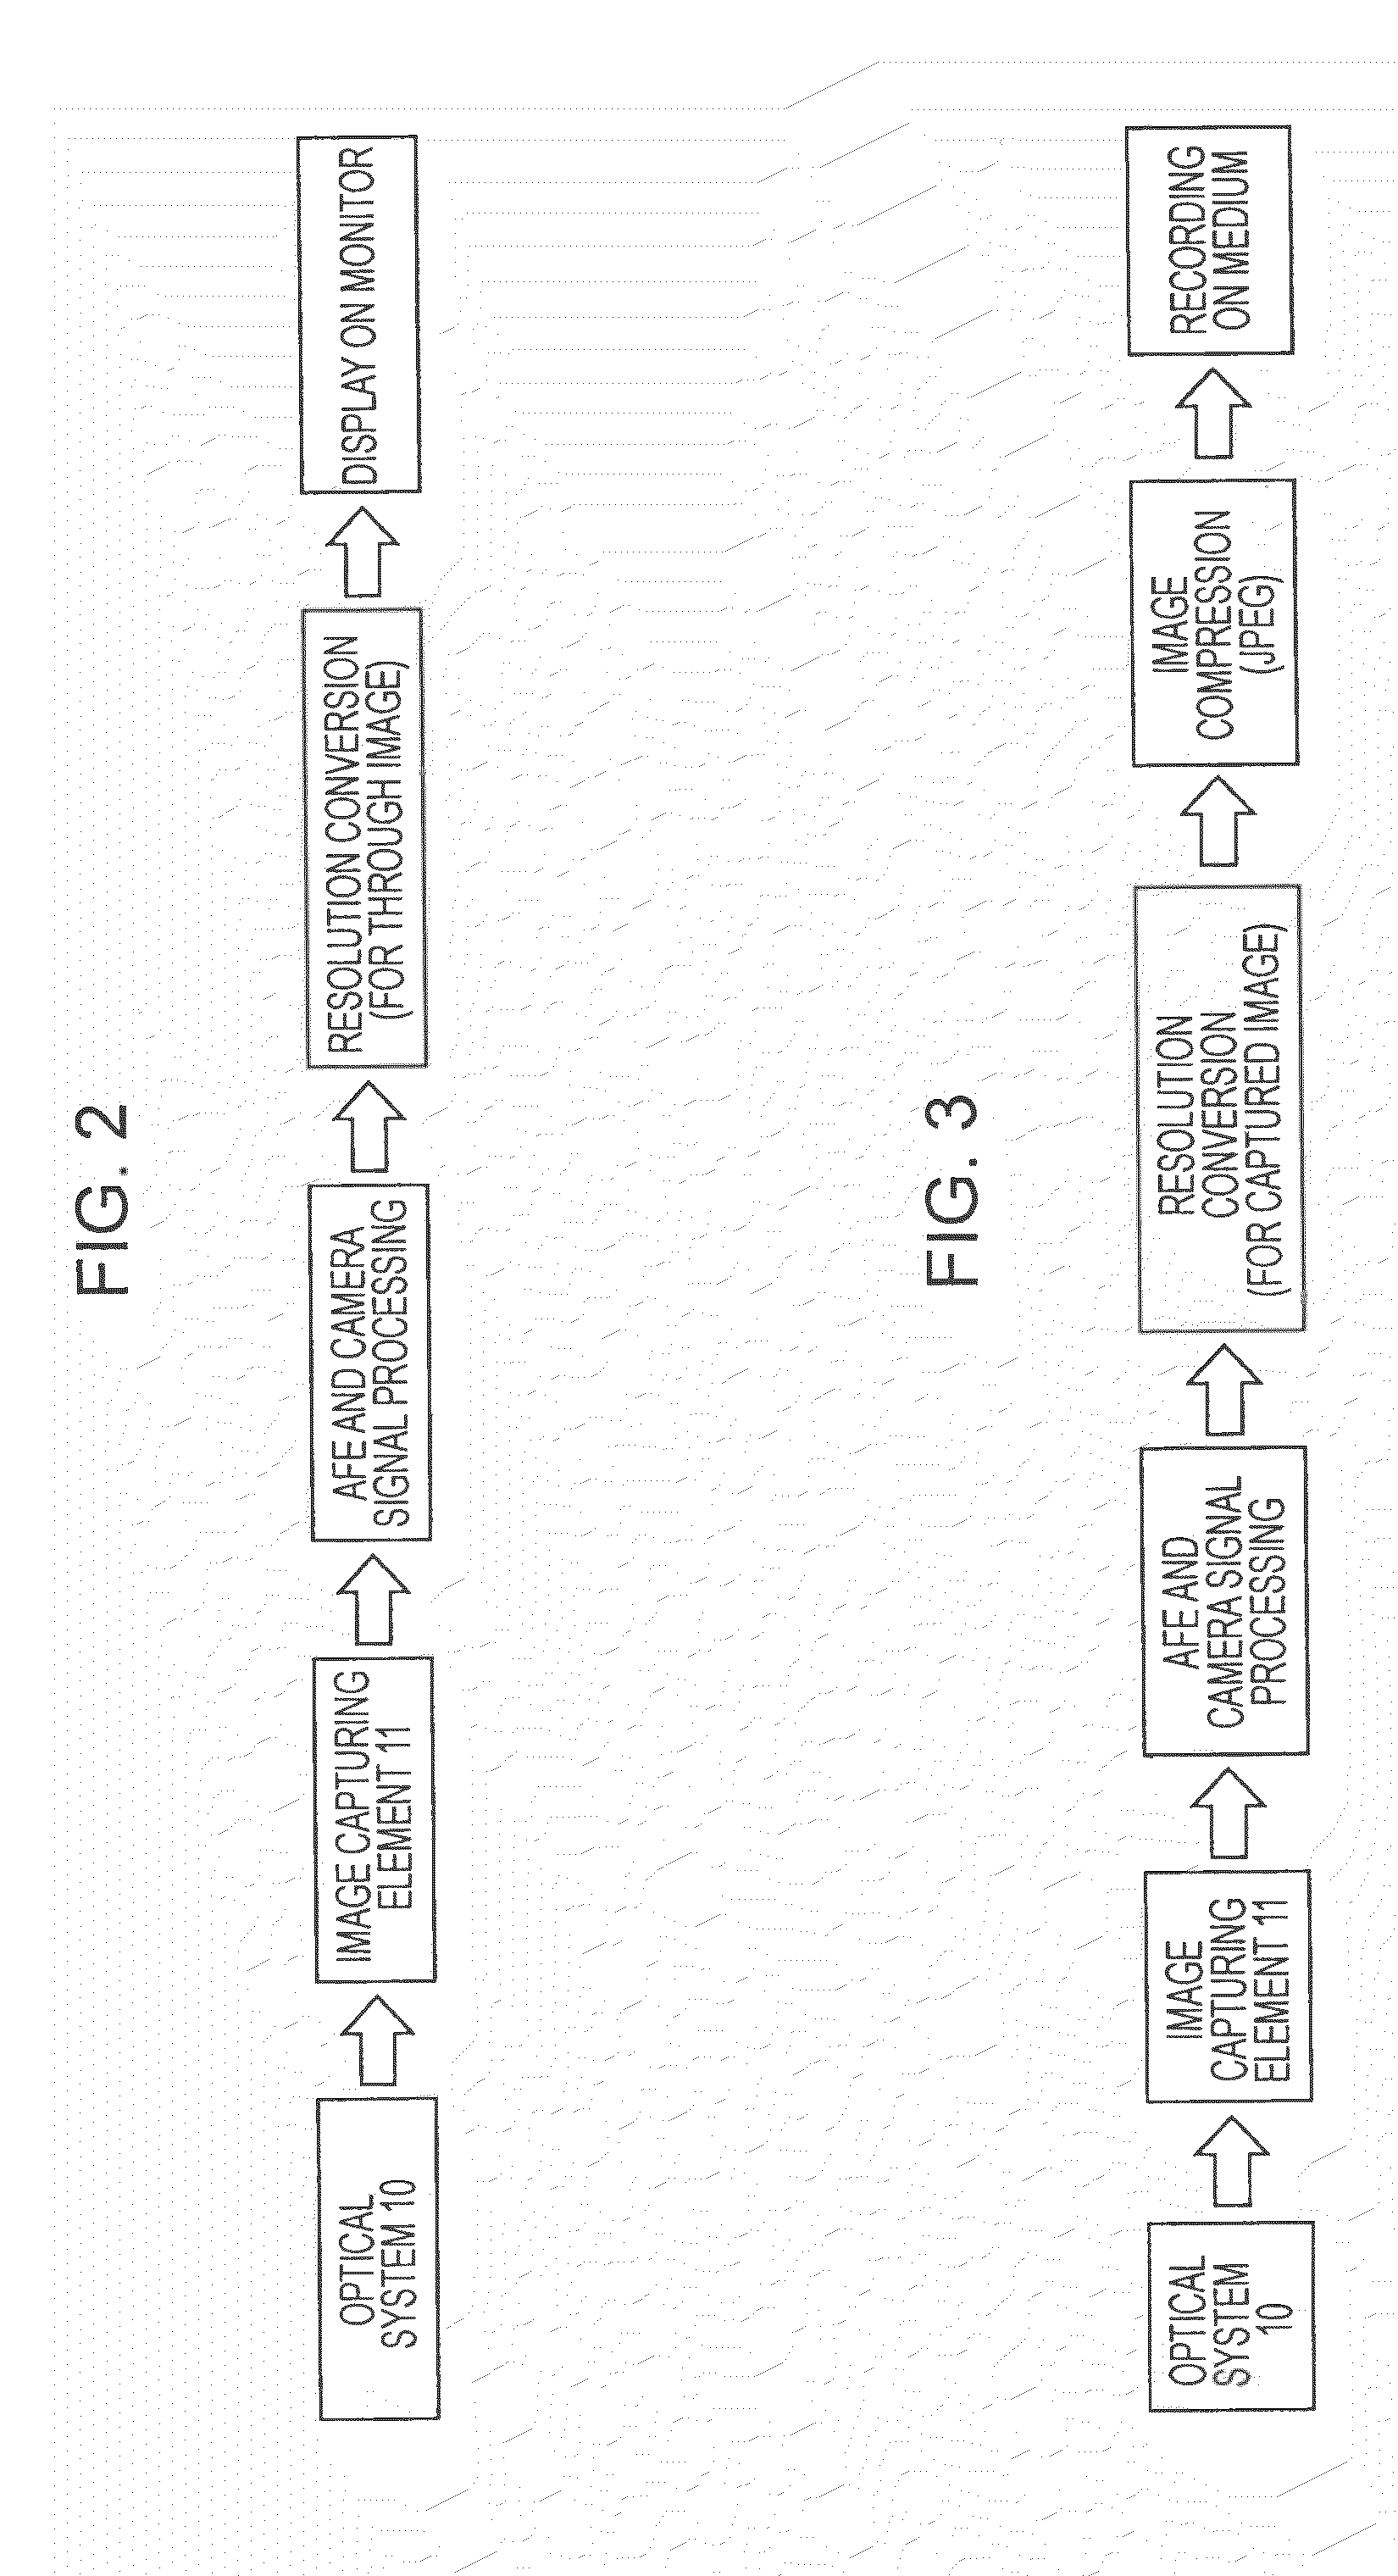 Image photographing apparatus, image photographing method, and computer program